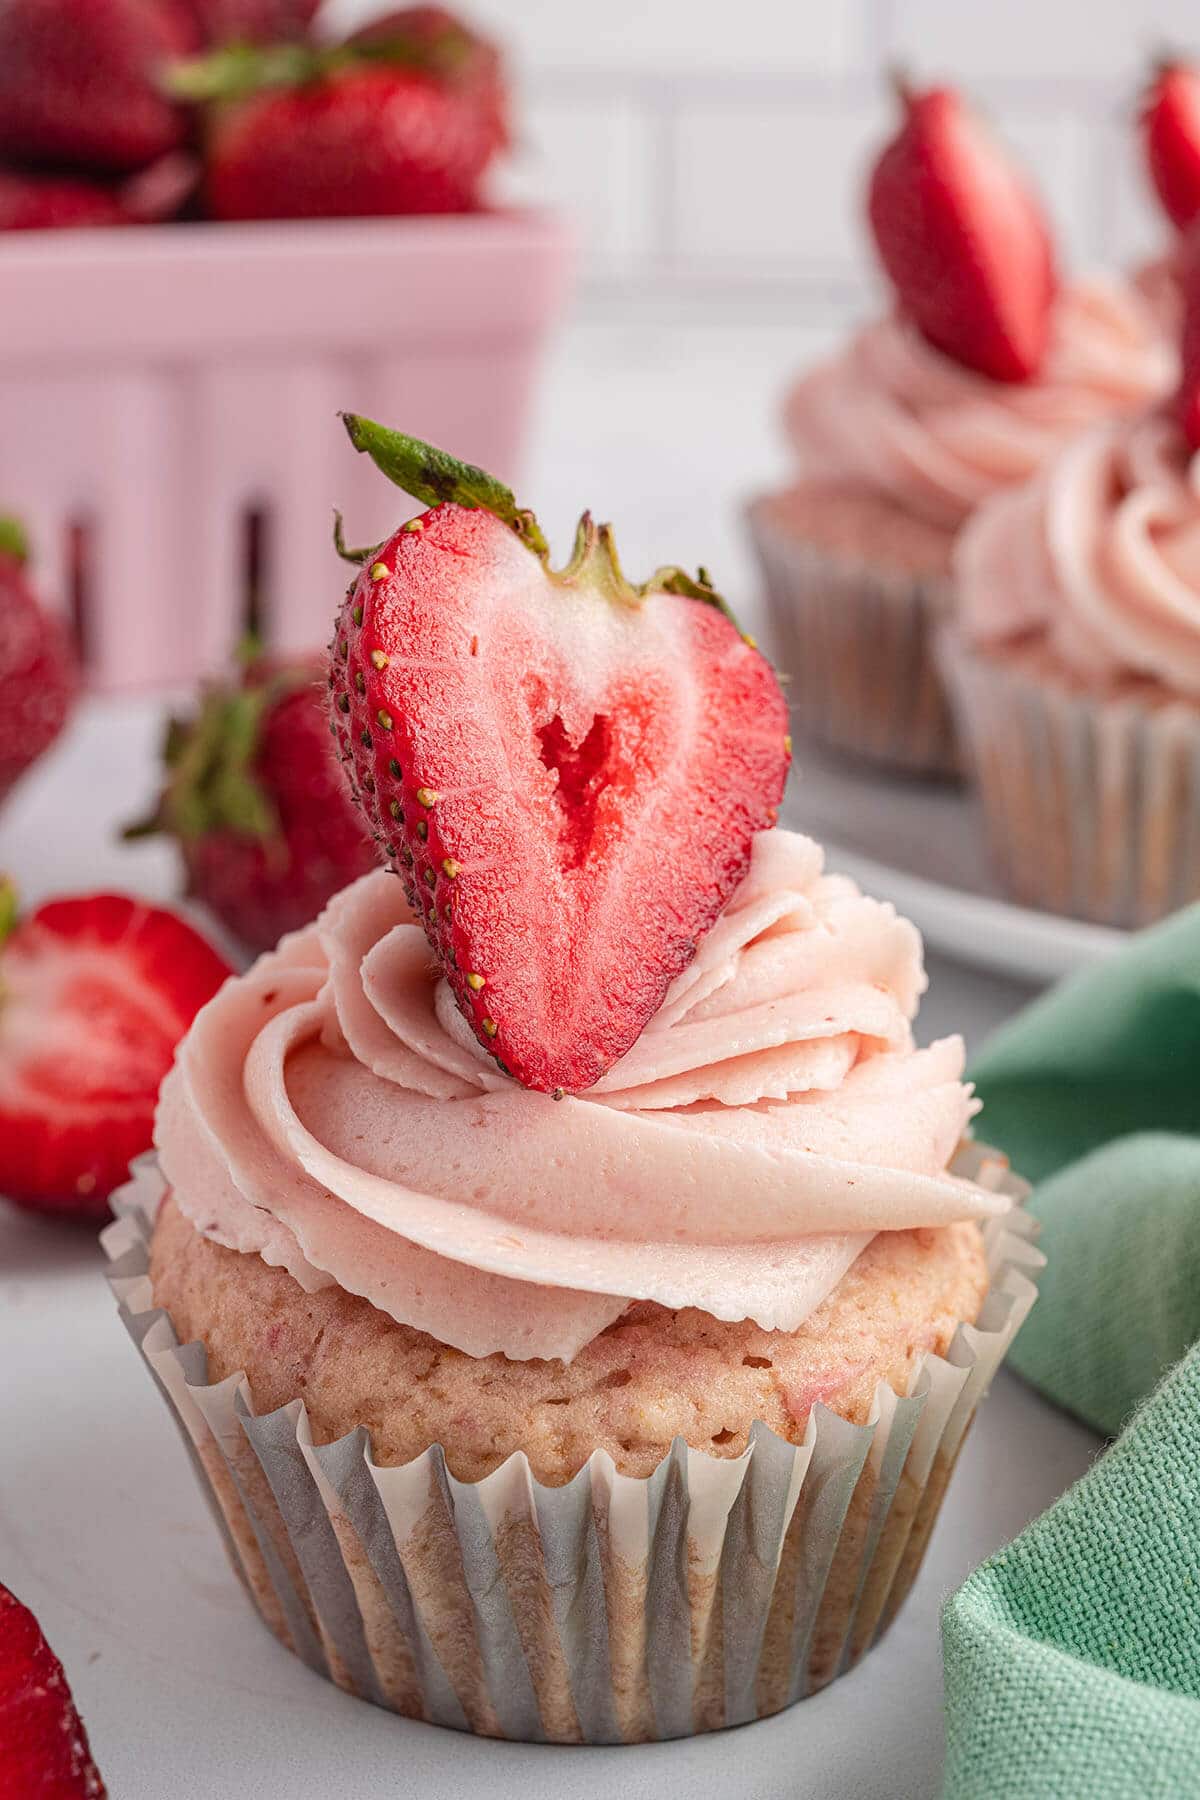 A cupcake with strawberry buttercream icing.